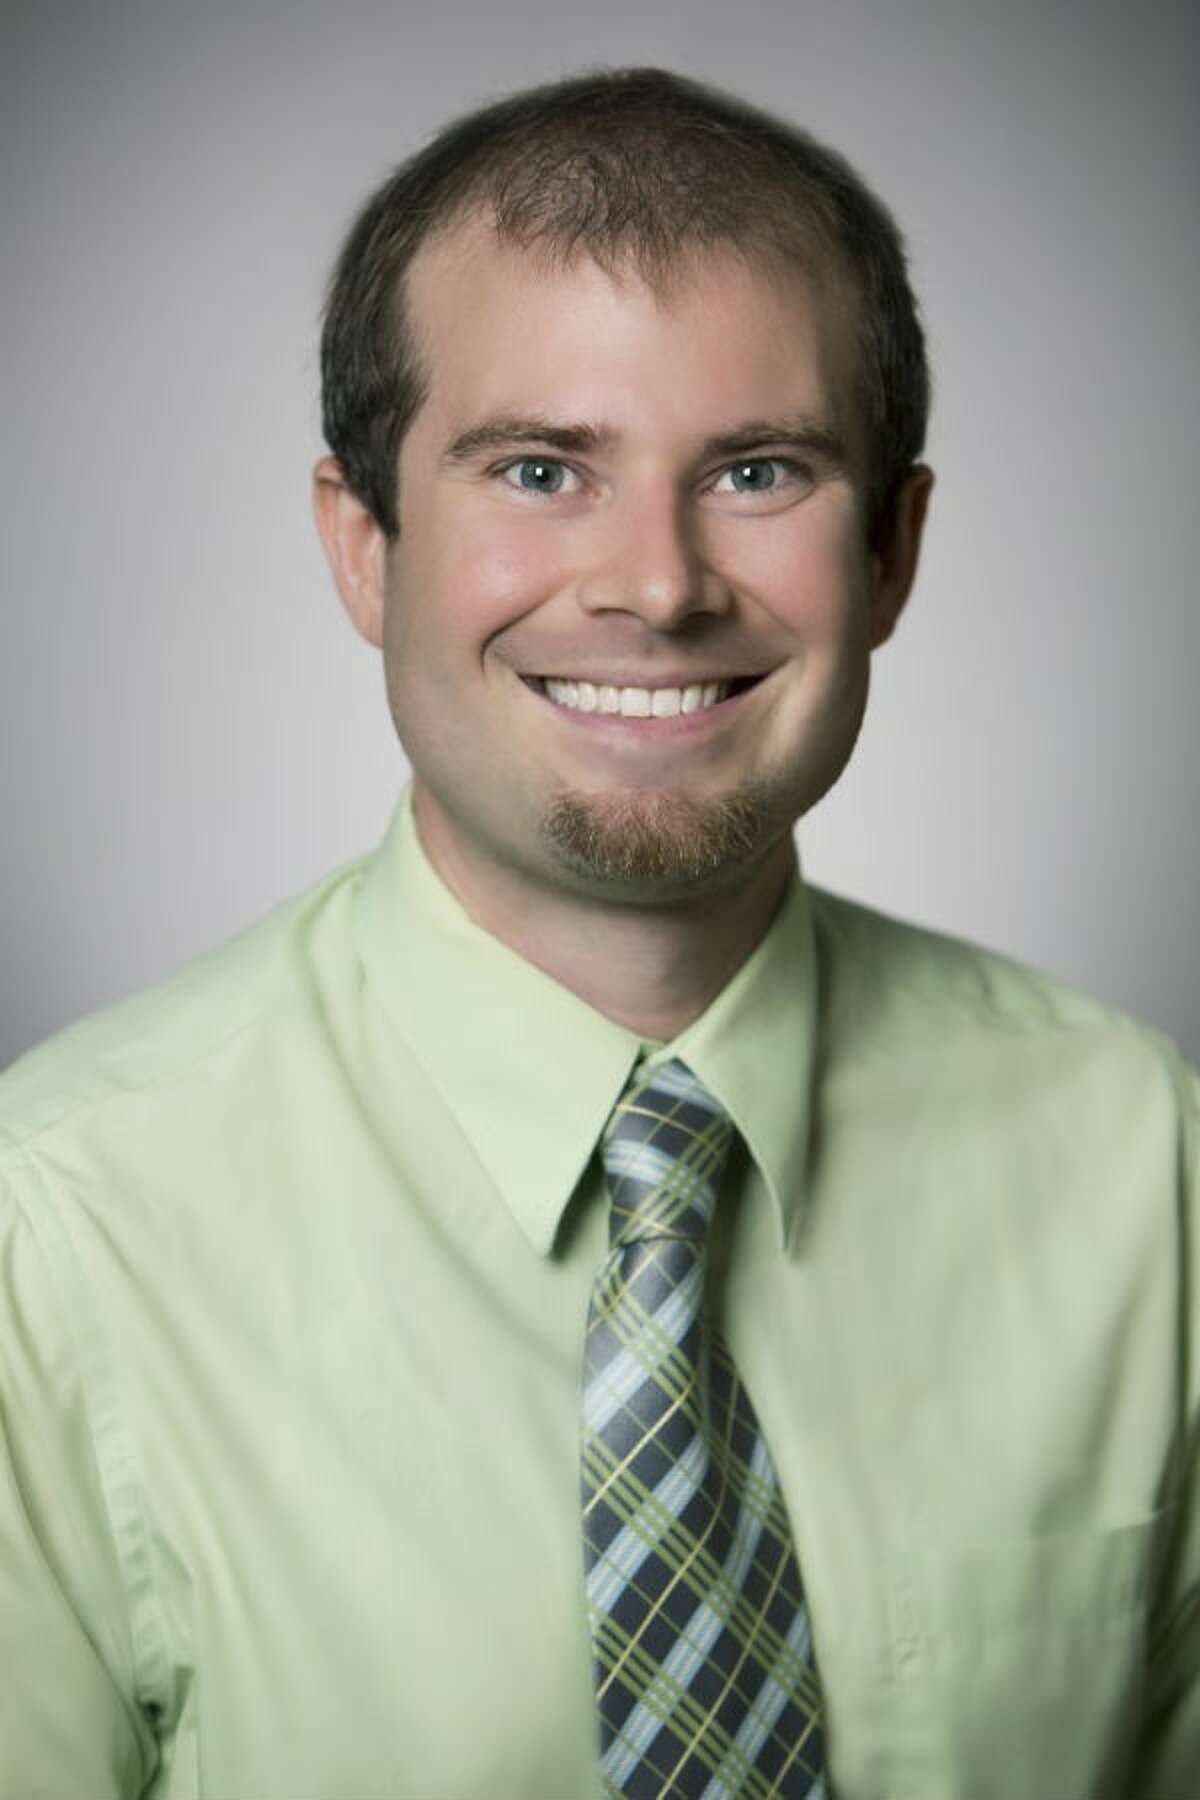 Urologist Kyle Keyes, M.D., has joined Memorial Hermann Medical Group Sugar Land Multi-Specialty Clinic